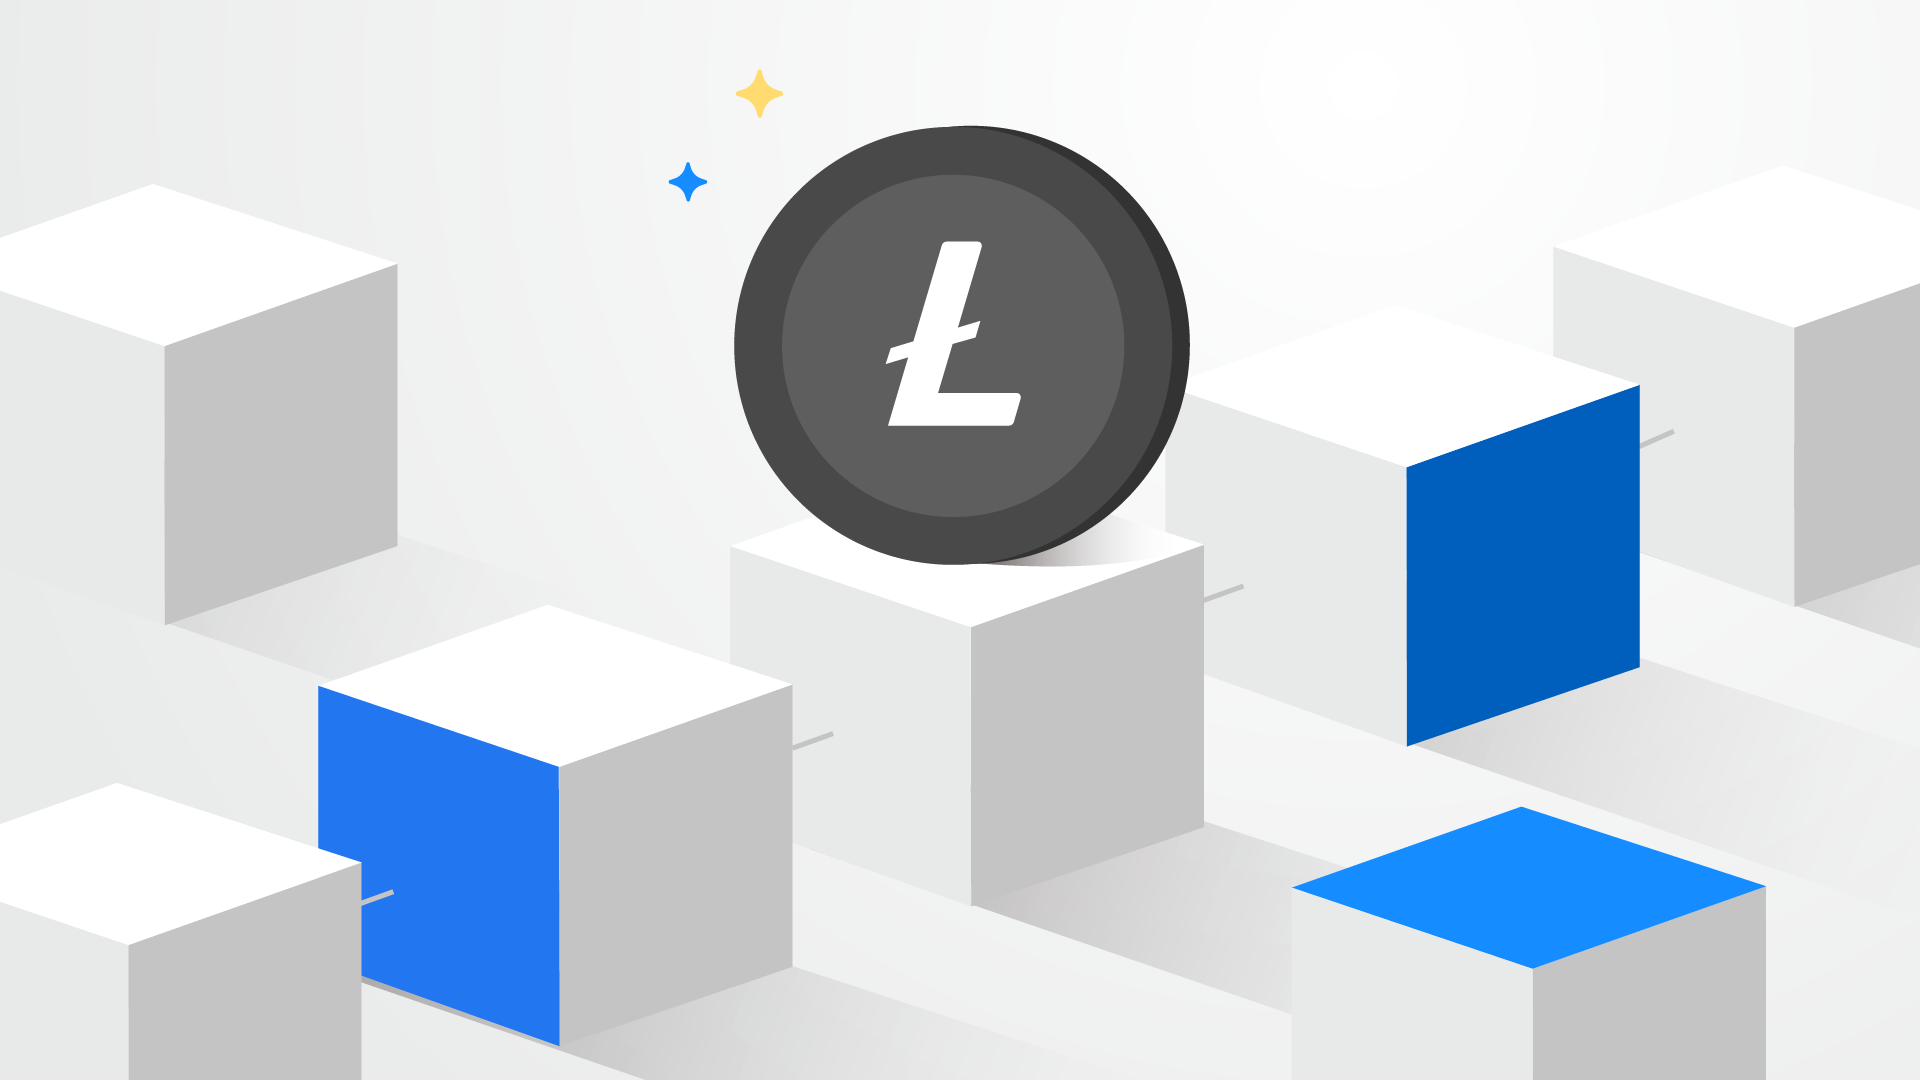 Before You Invest: Litecoin (LTC)